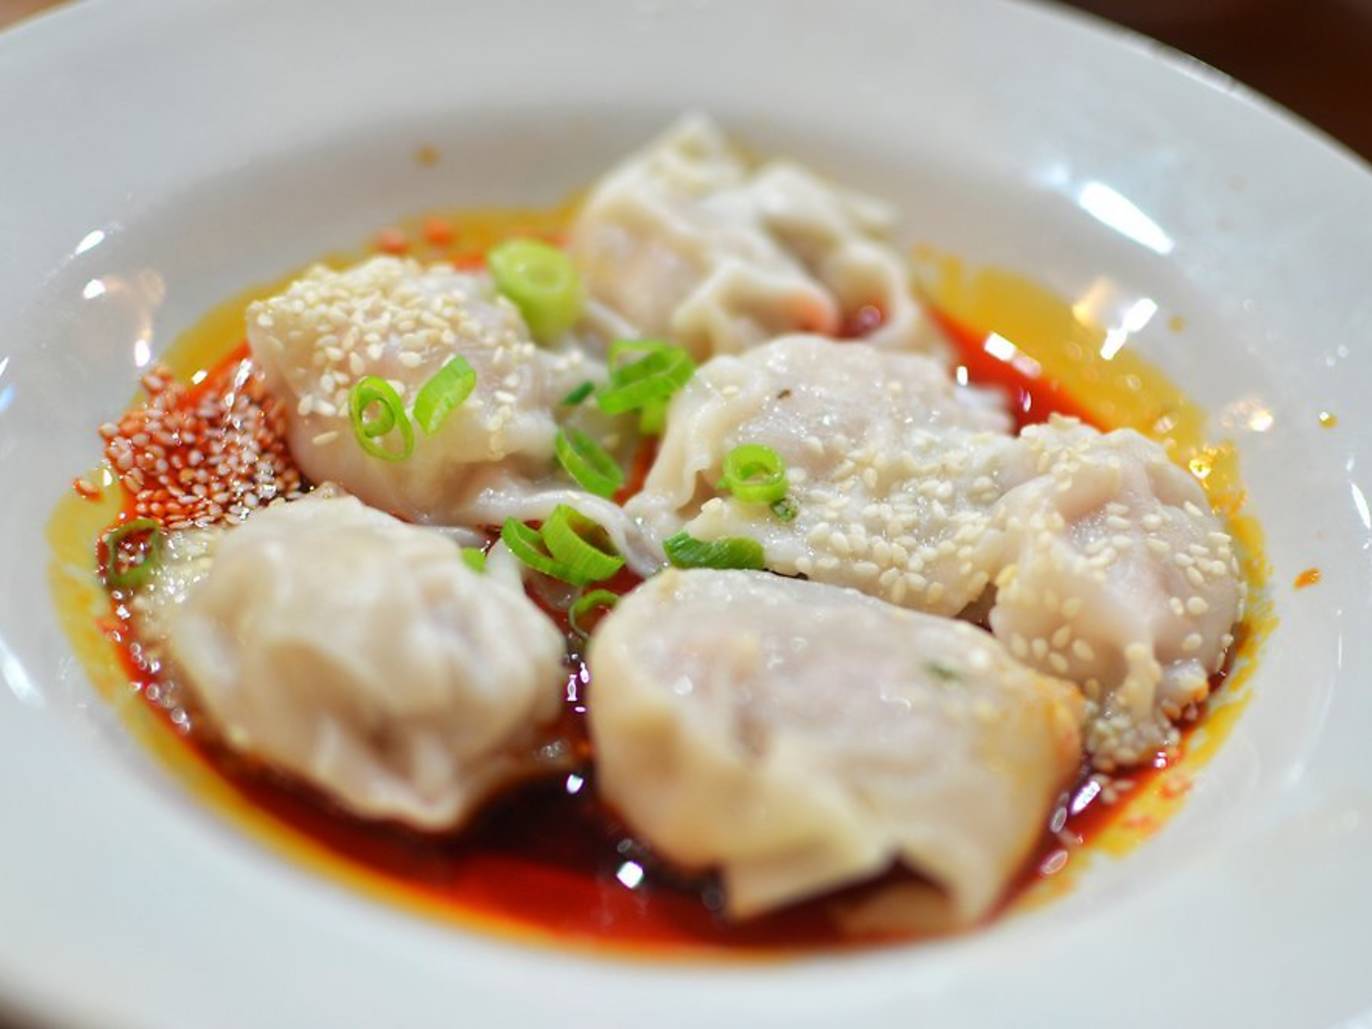 Best Chinese food in DC, for dumplings, noodles and more